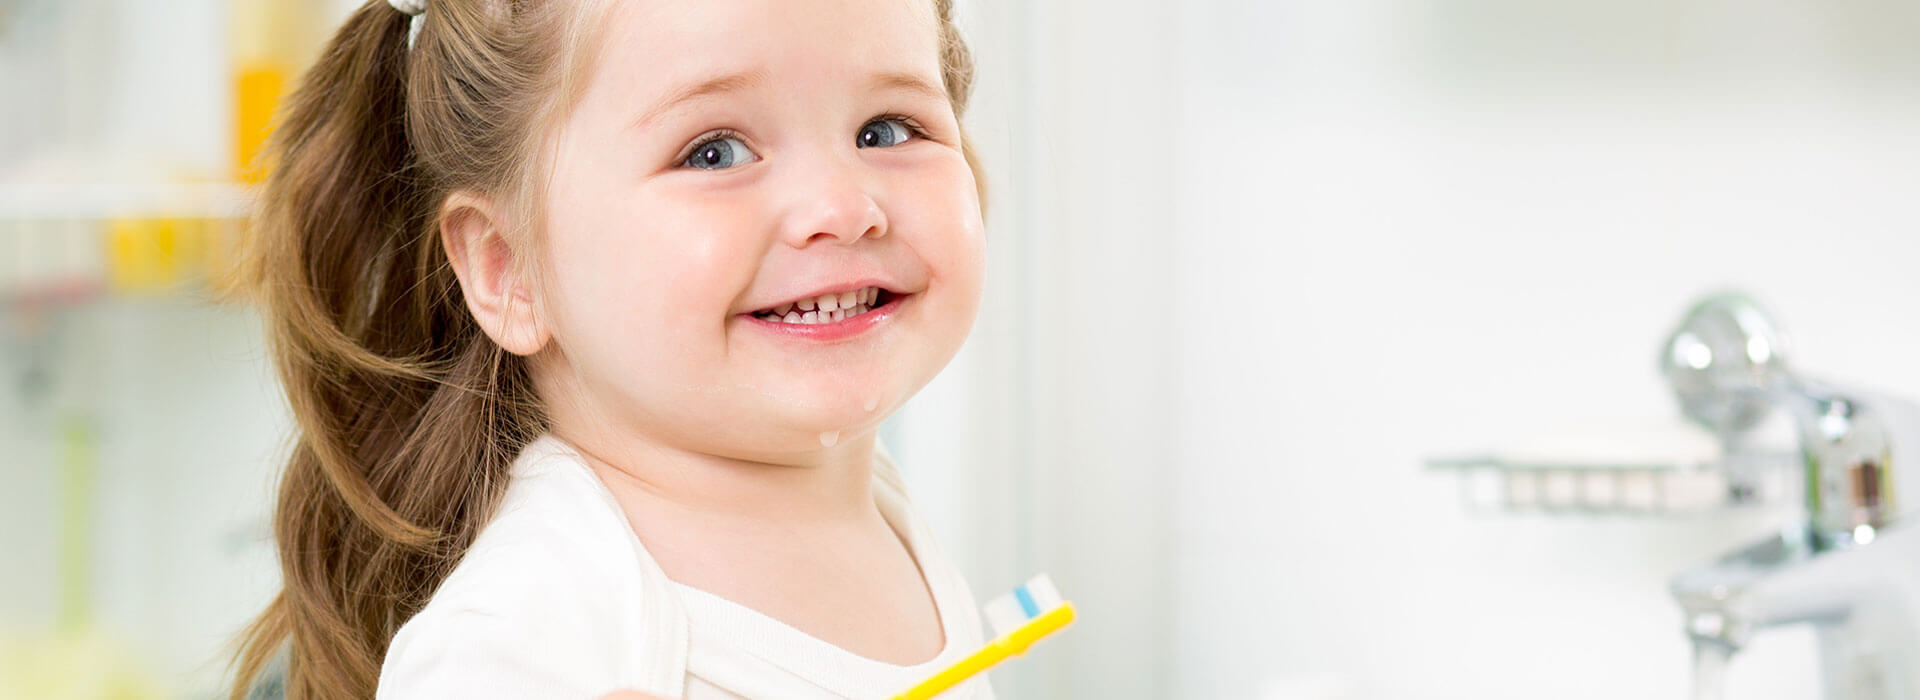 How Often Should a Child See a Pediatric Dentist?